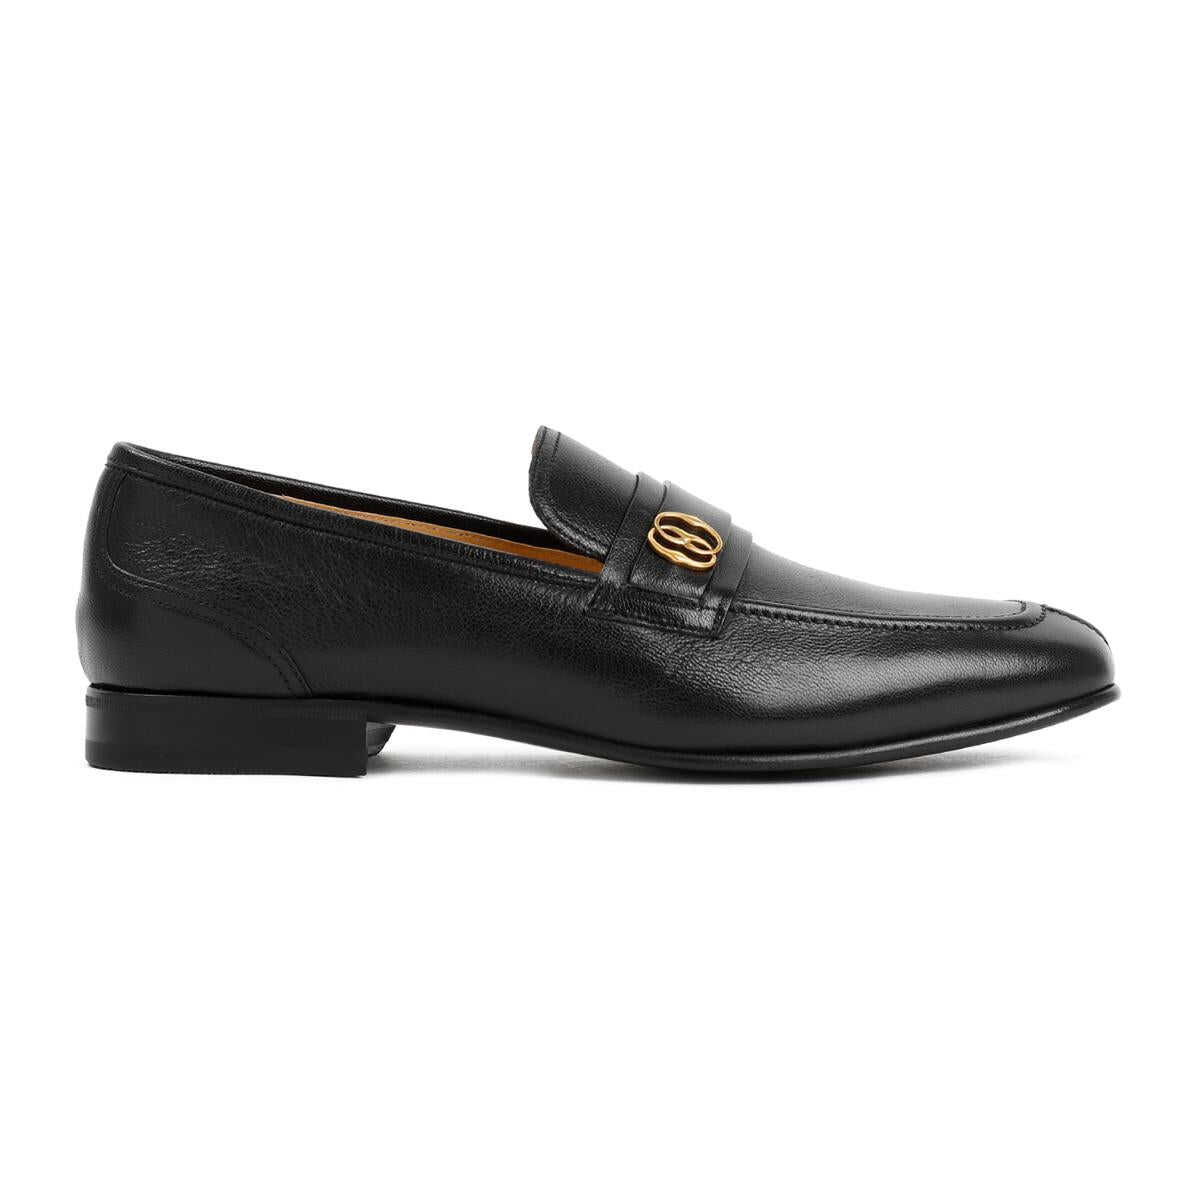 Bally BALLY LOAFER SHOES BLACK